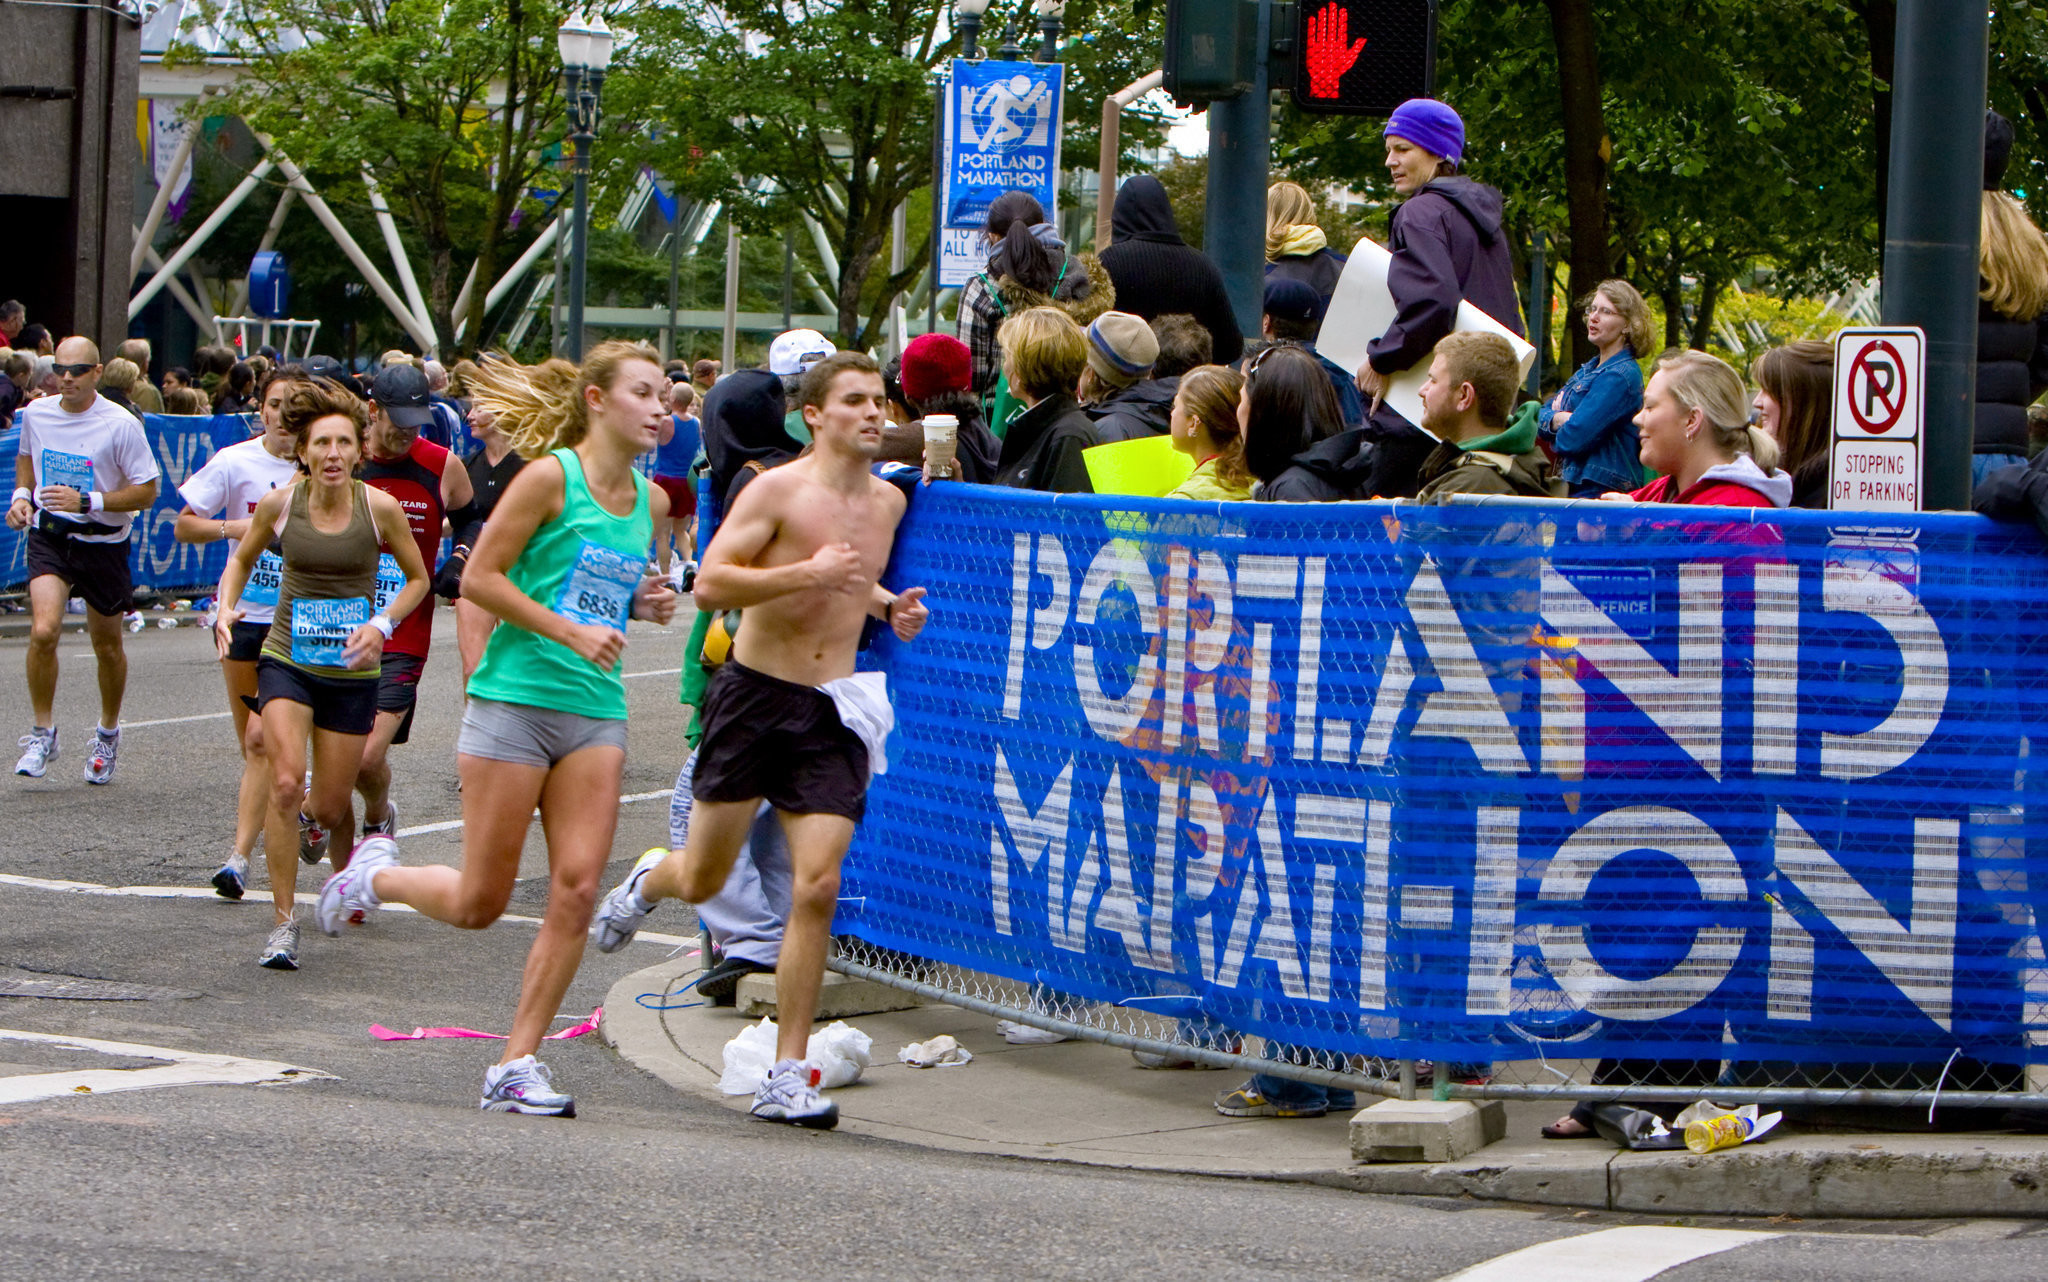 The 2018 Portland Marathon is back in play, details should be announced in early June 